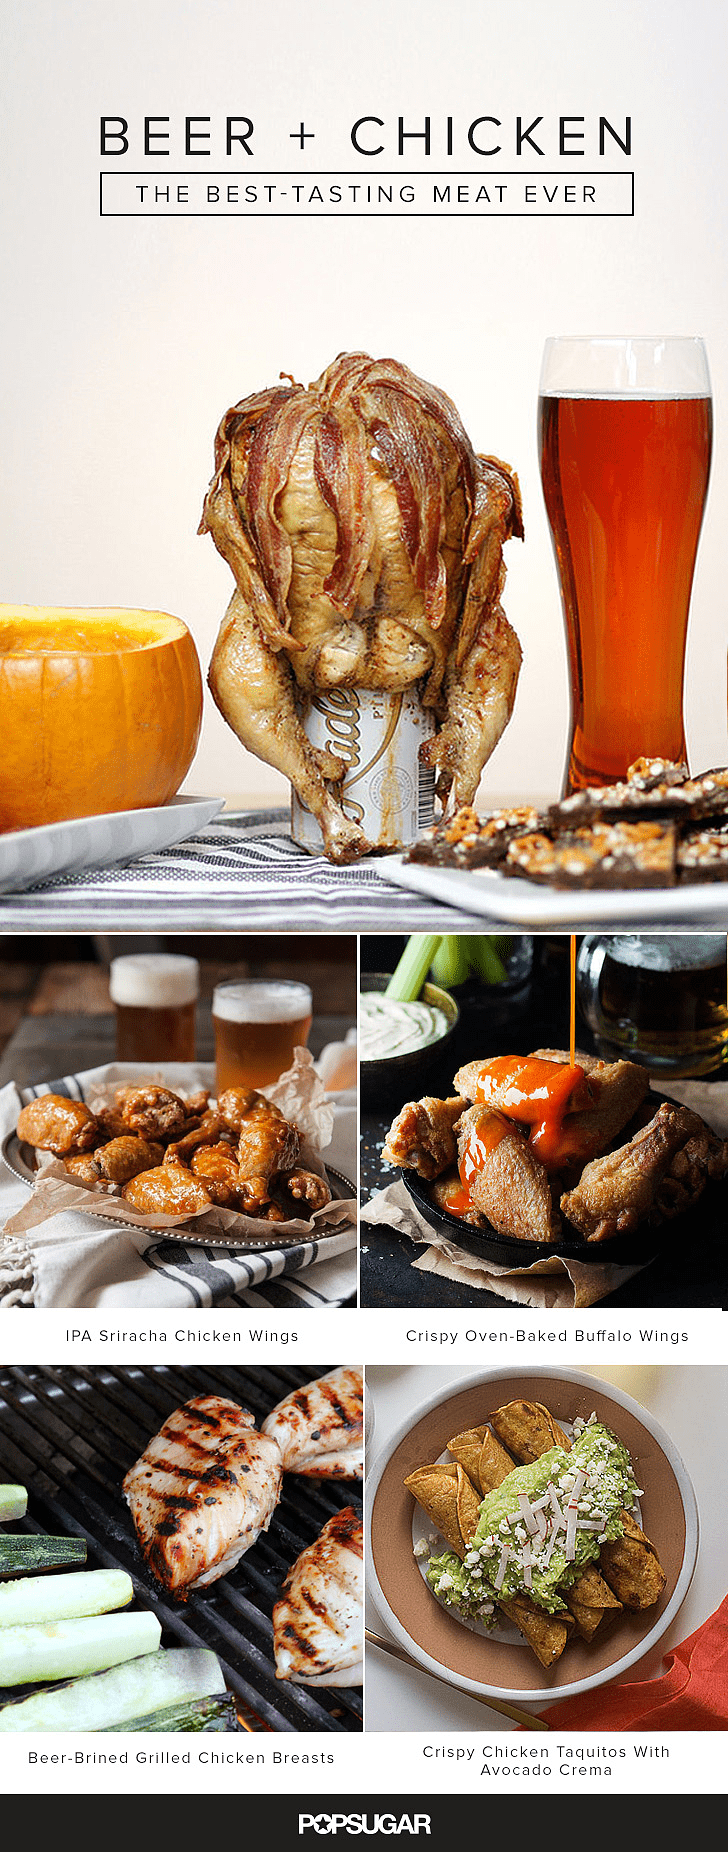 Get the recipes: beer plus chicken recipes